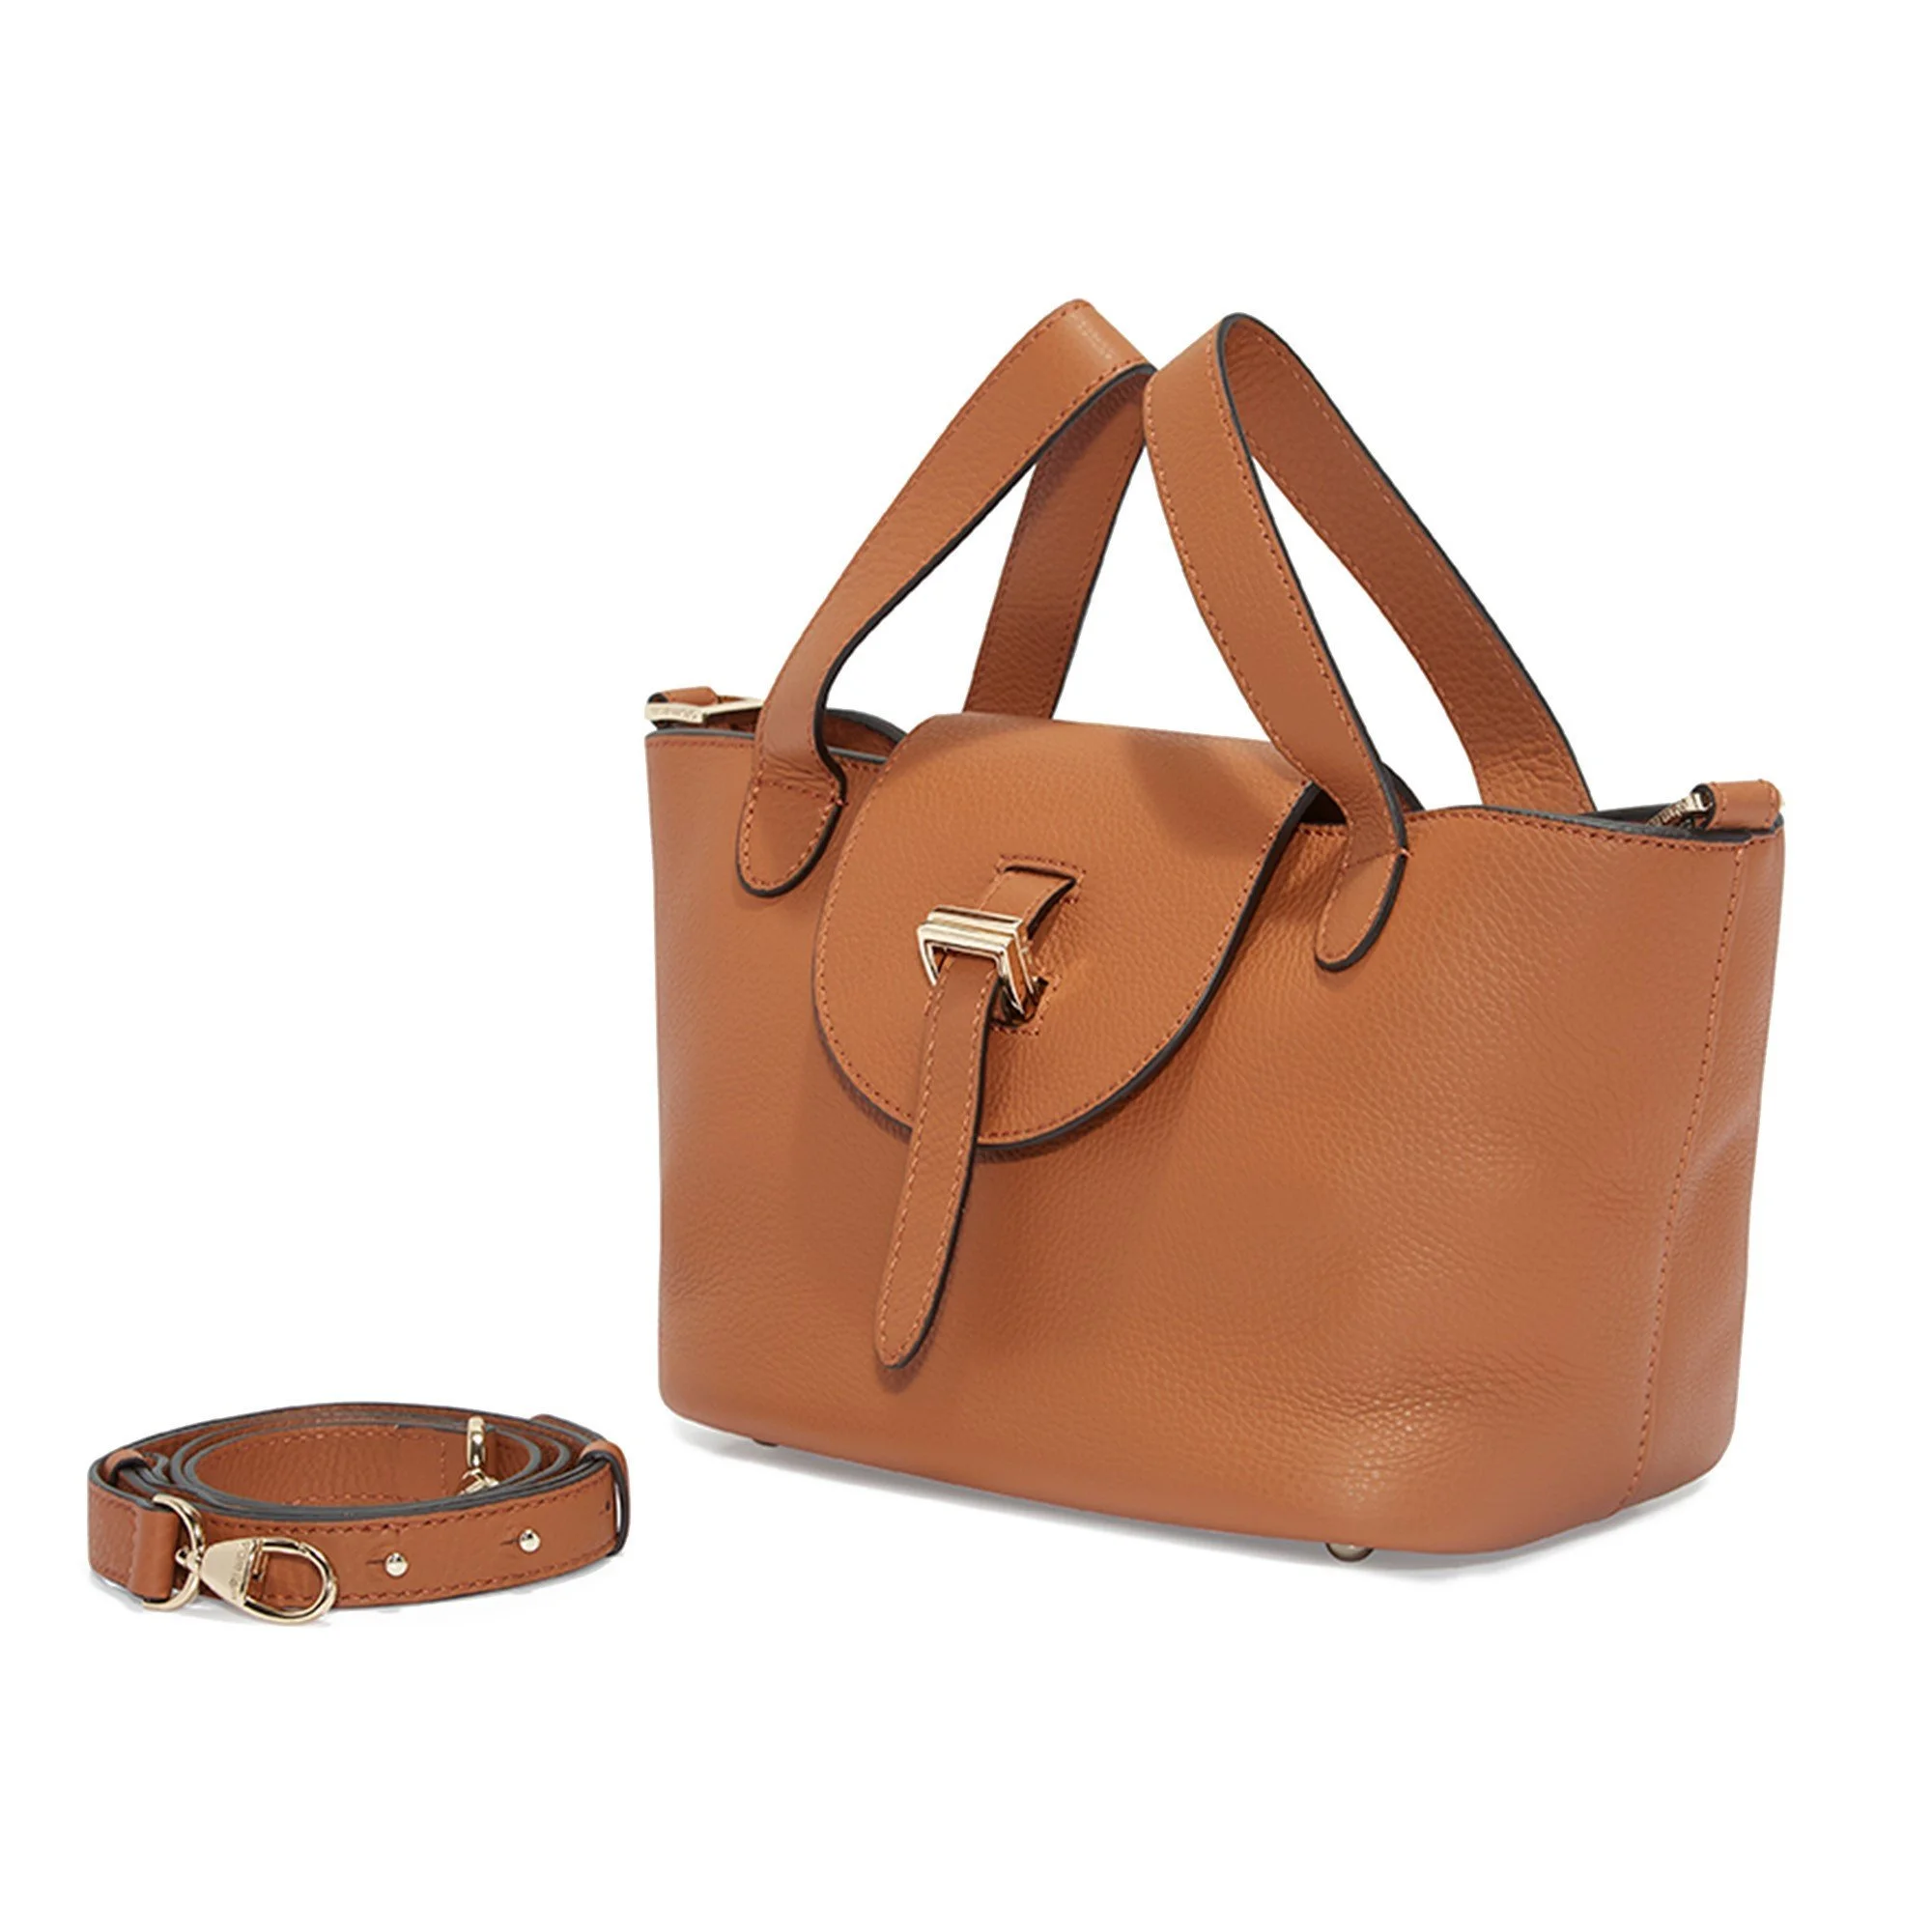 Thela Mini Tan and Green with Zip Closure Cross Body Bag for Women